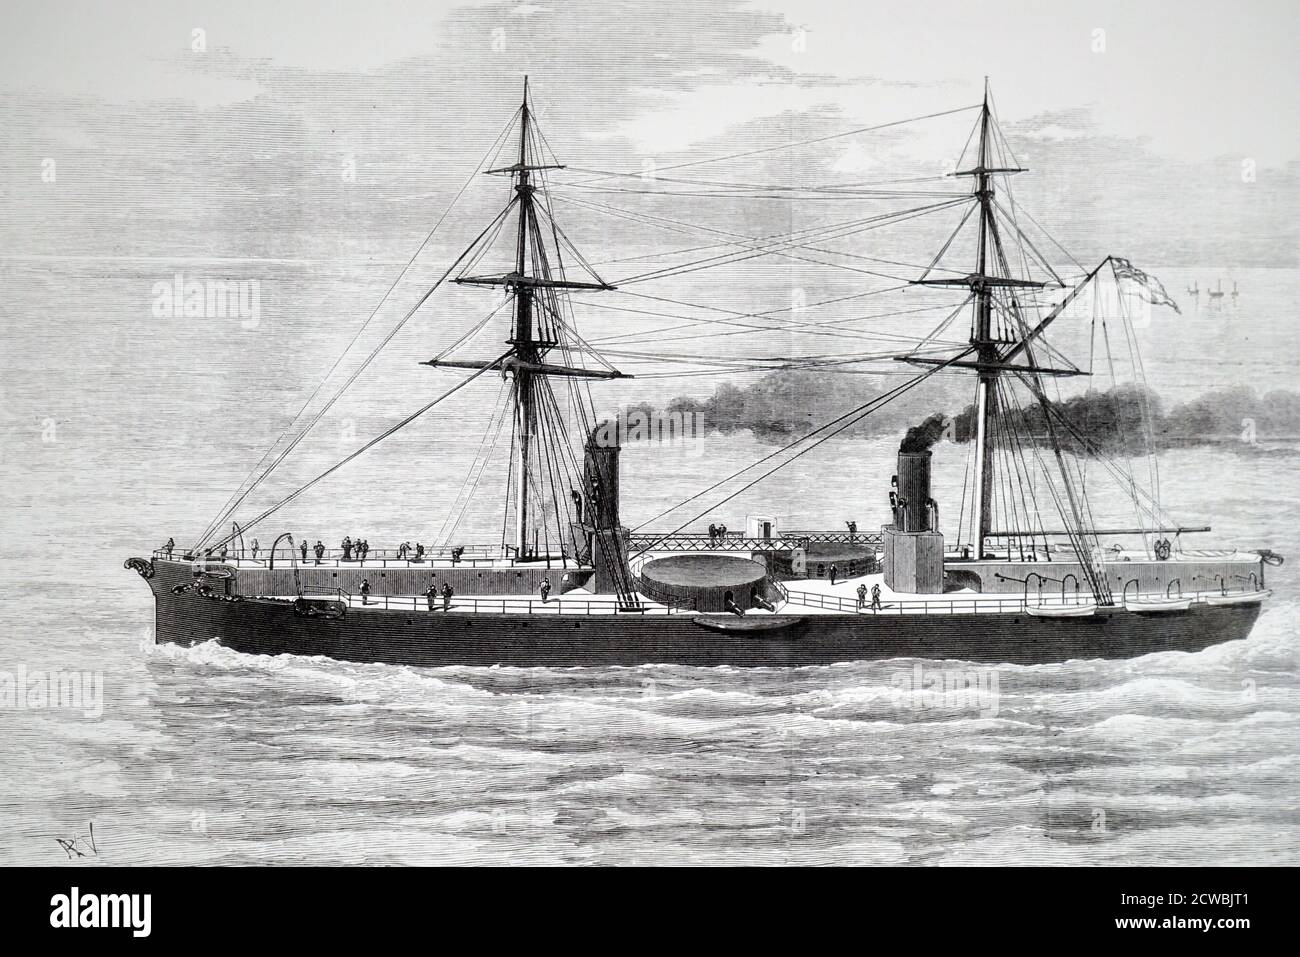 Engraving depicting the HMS Inflexible, launched 27th April 1876. In 1881 the Inflexible was the first ship in the British navy to be fitted with Swan lamps. Stock Photo